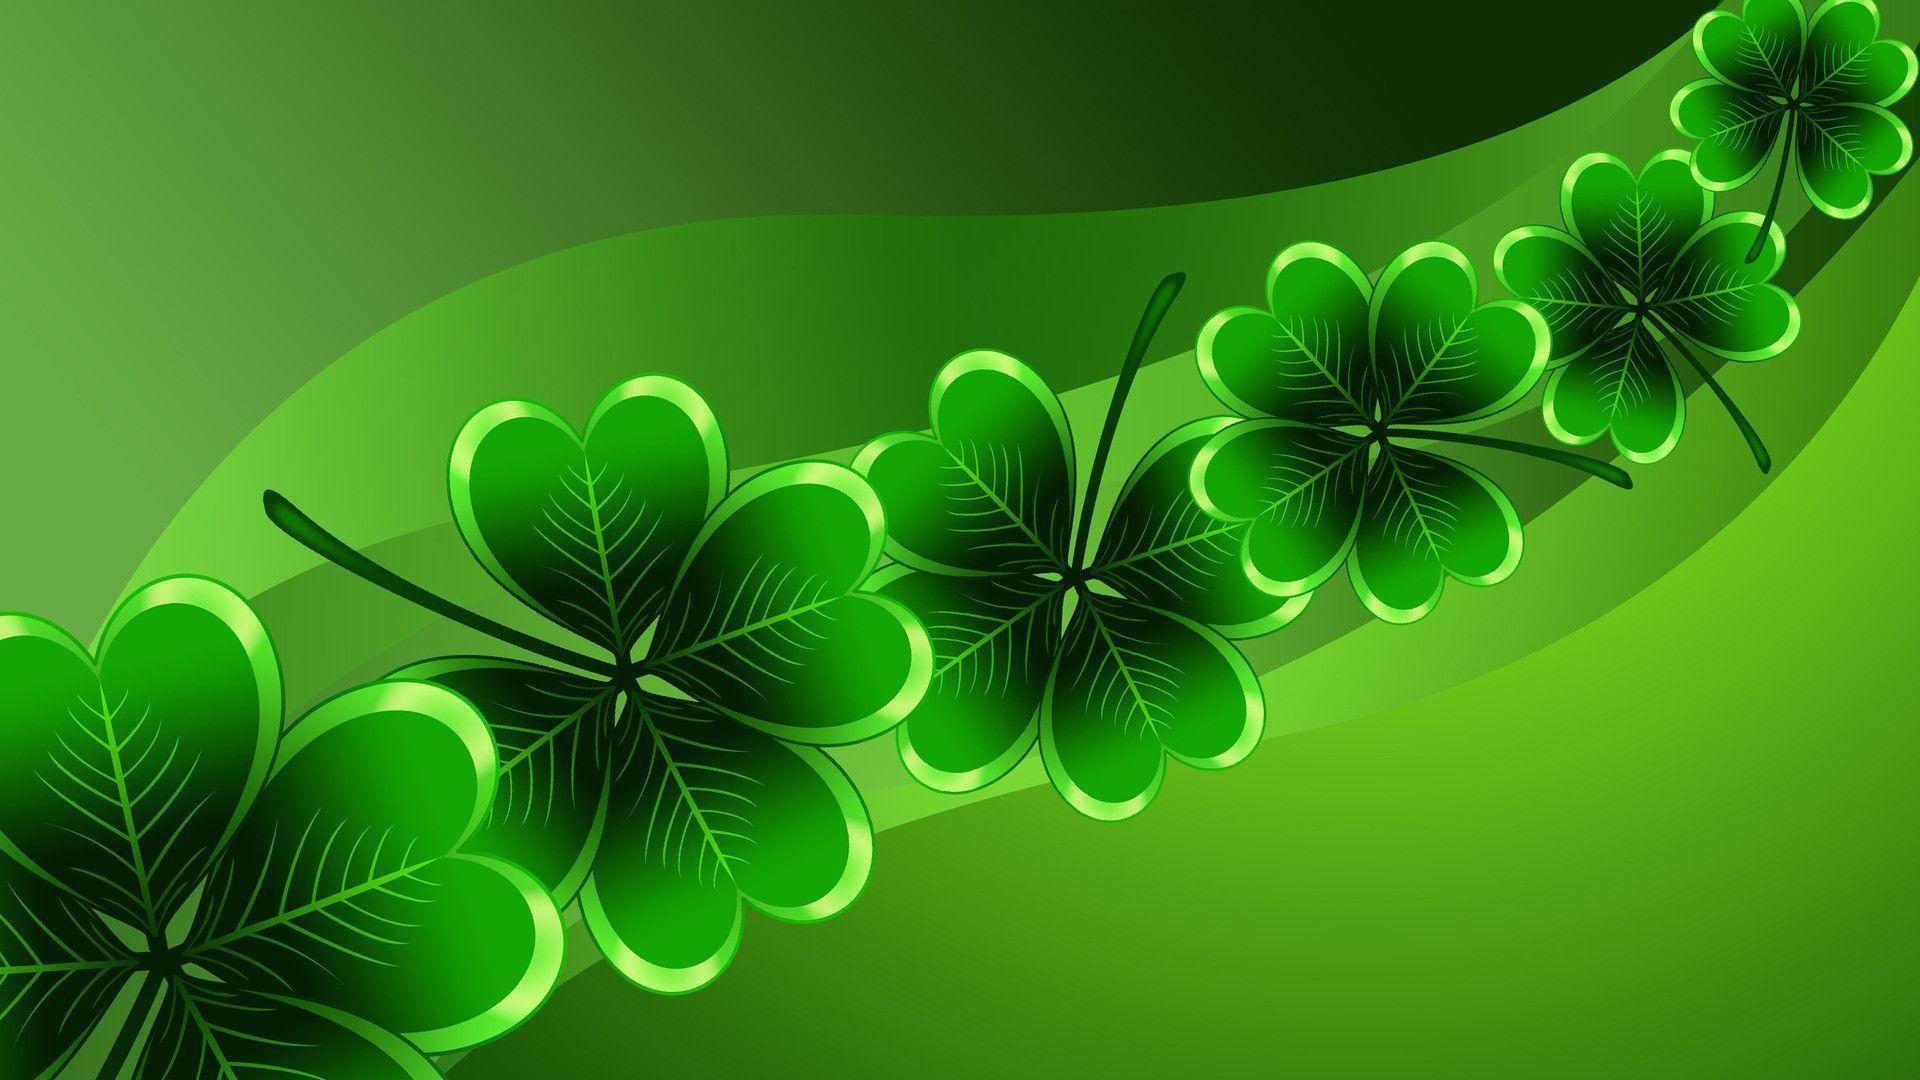 St Patricks Day Wallpaper Backgrounds 52 images